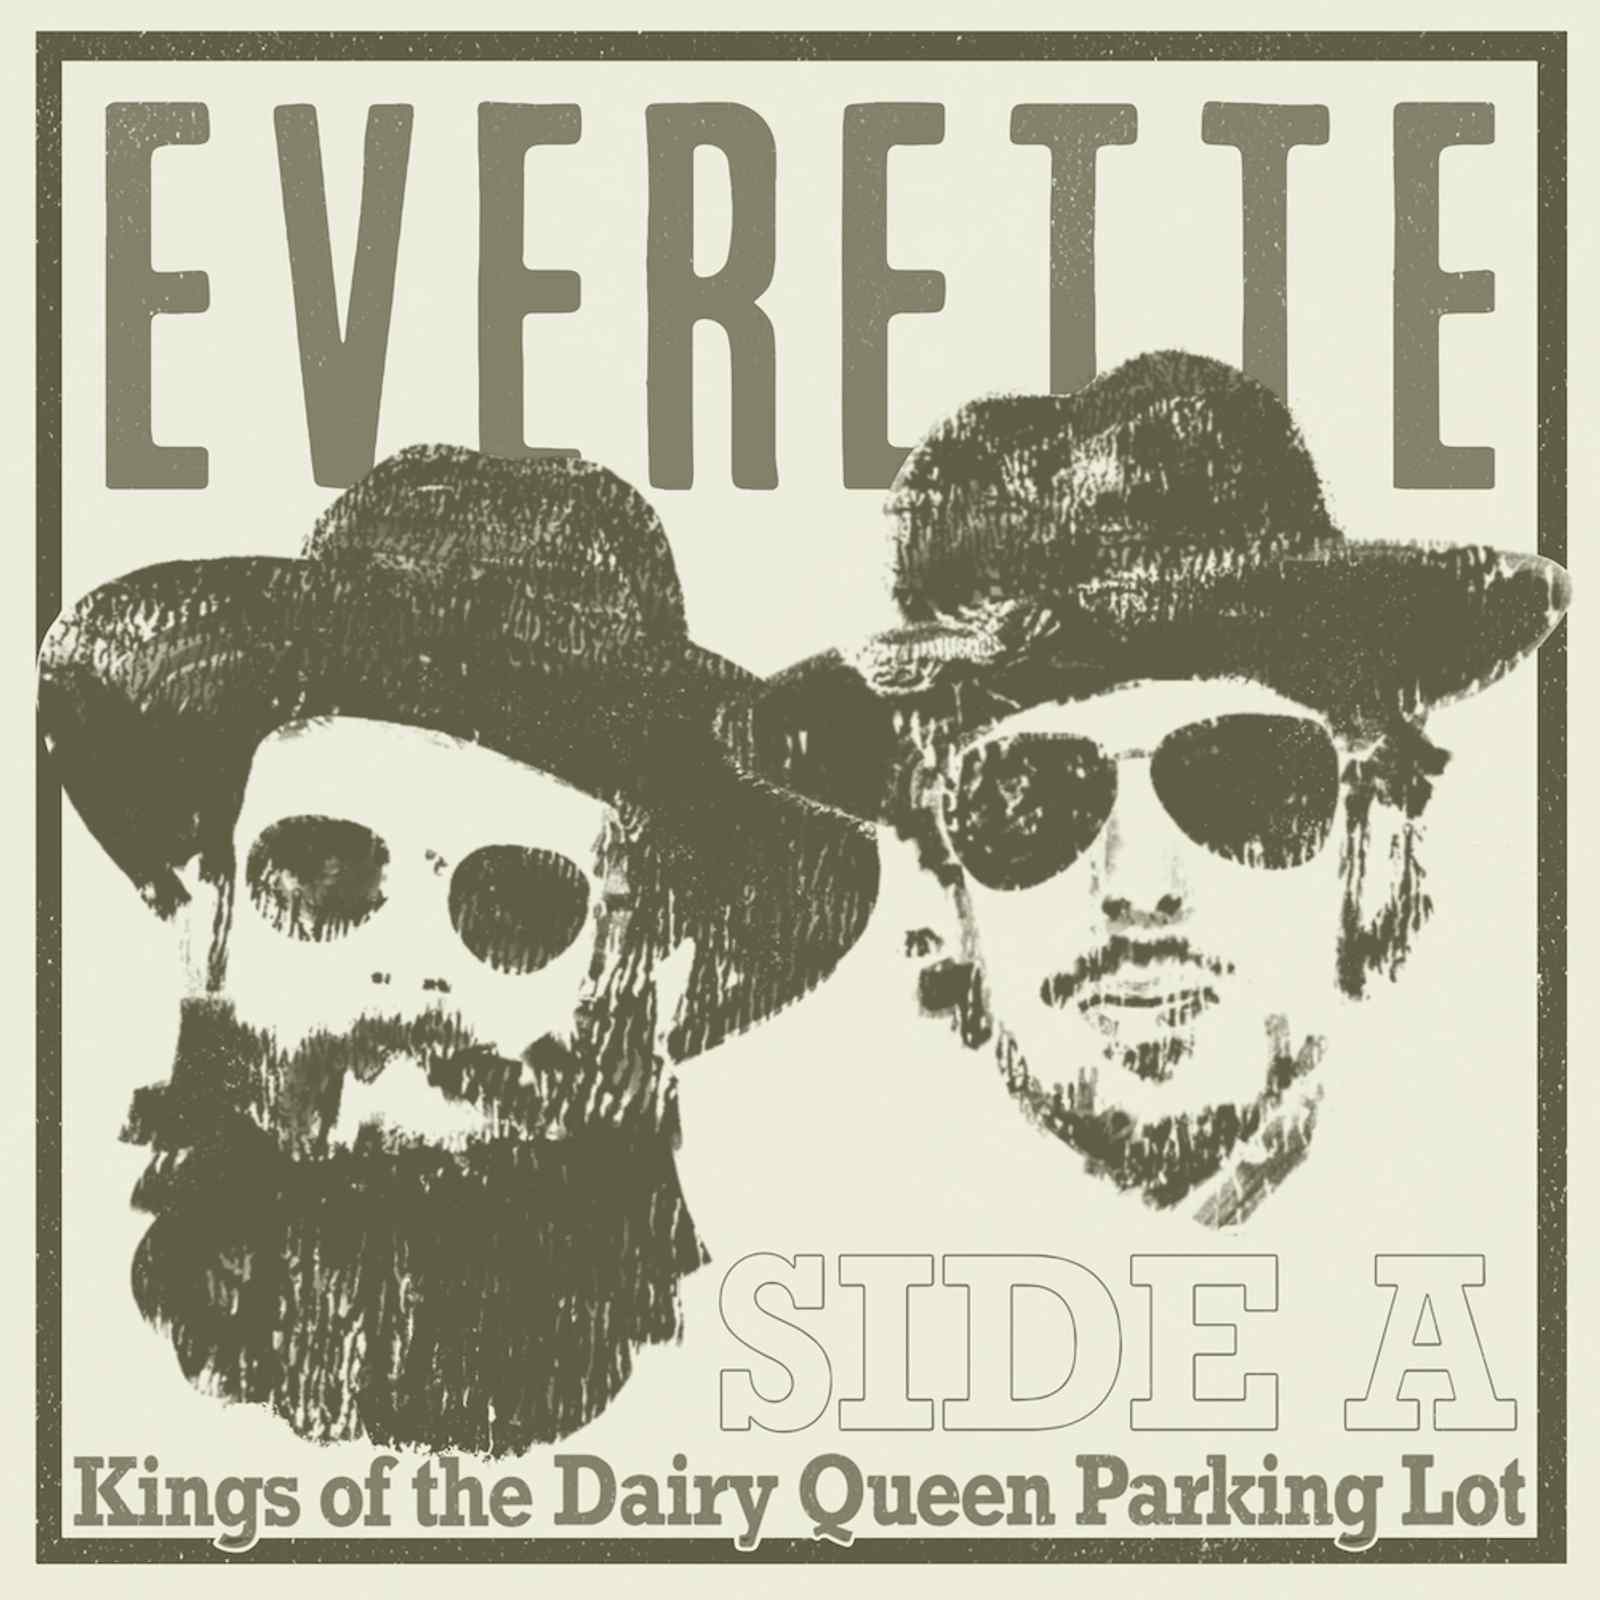 Kings of the Dairy Queen Parking Lot – Side A: Everette